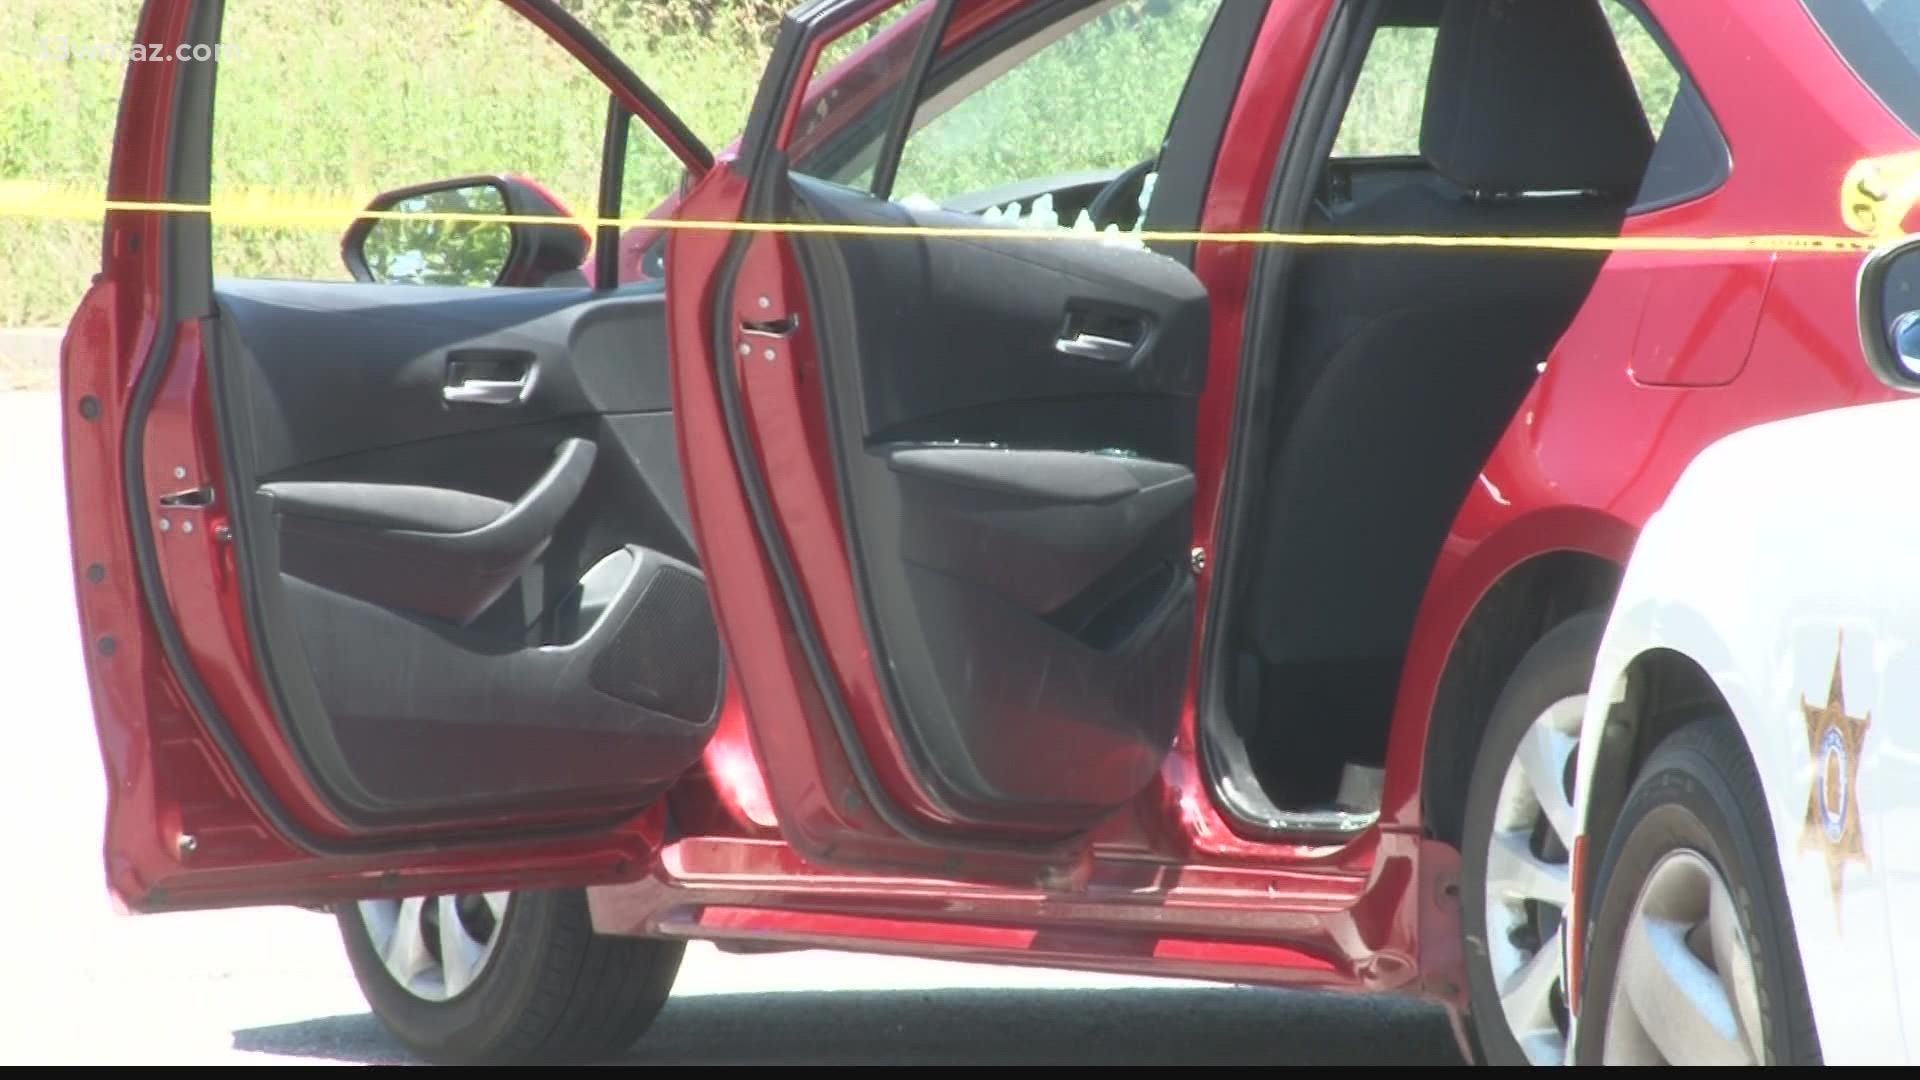 Two women and two children were inside the car at the time. It is unclear whether anyone was injured in the shooting.